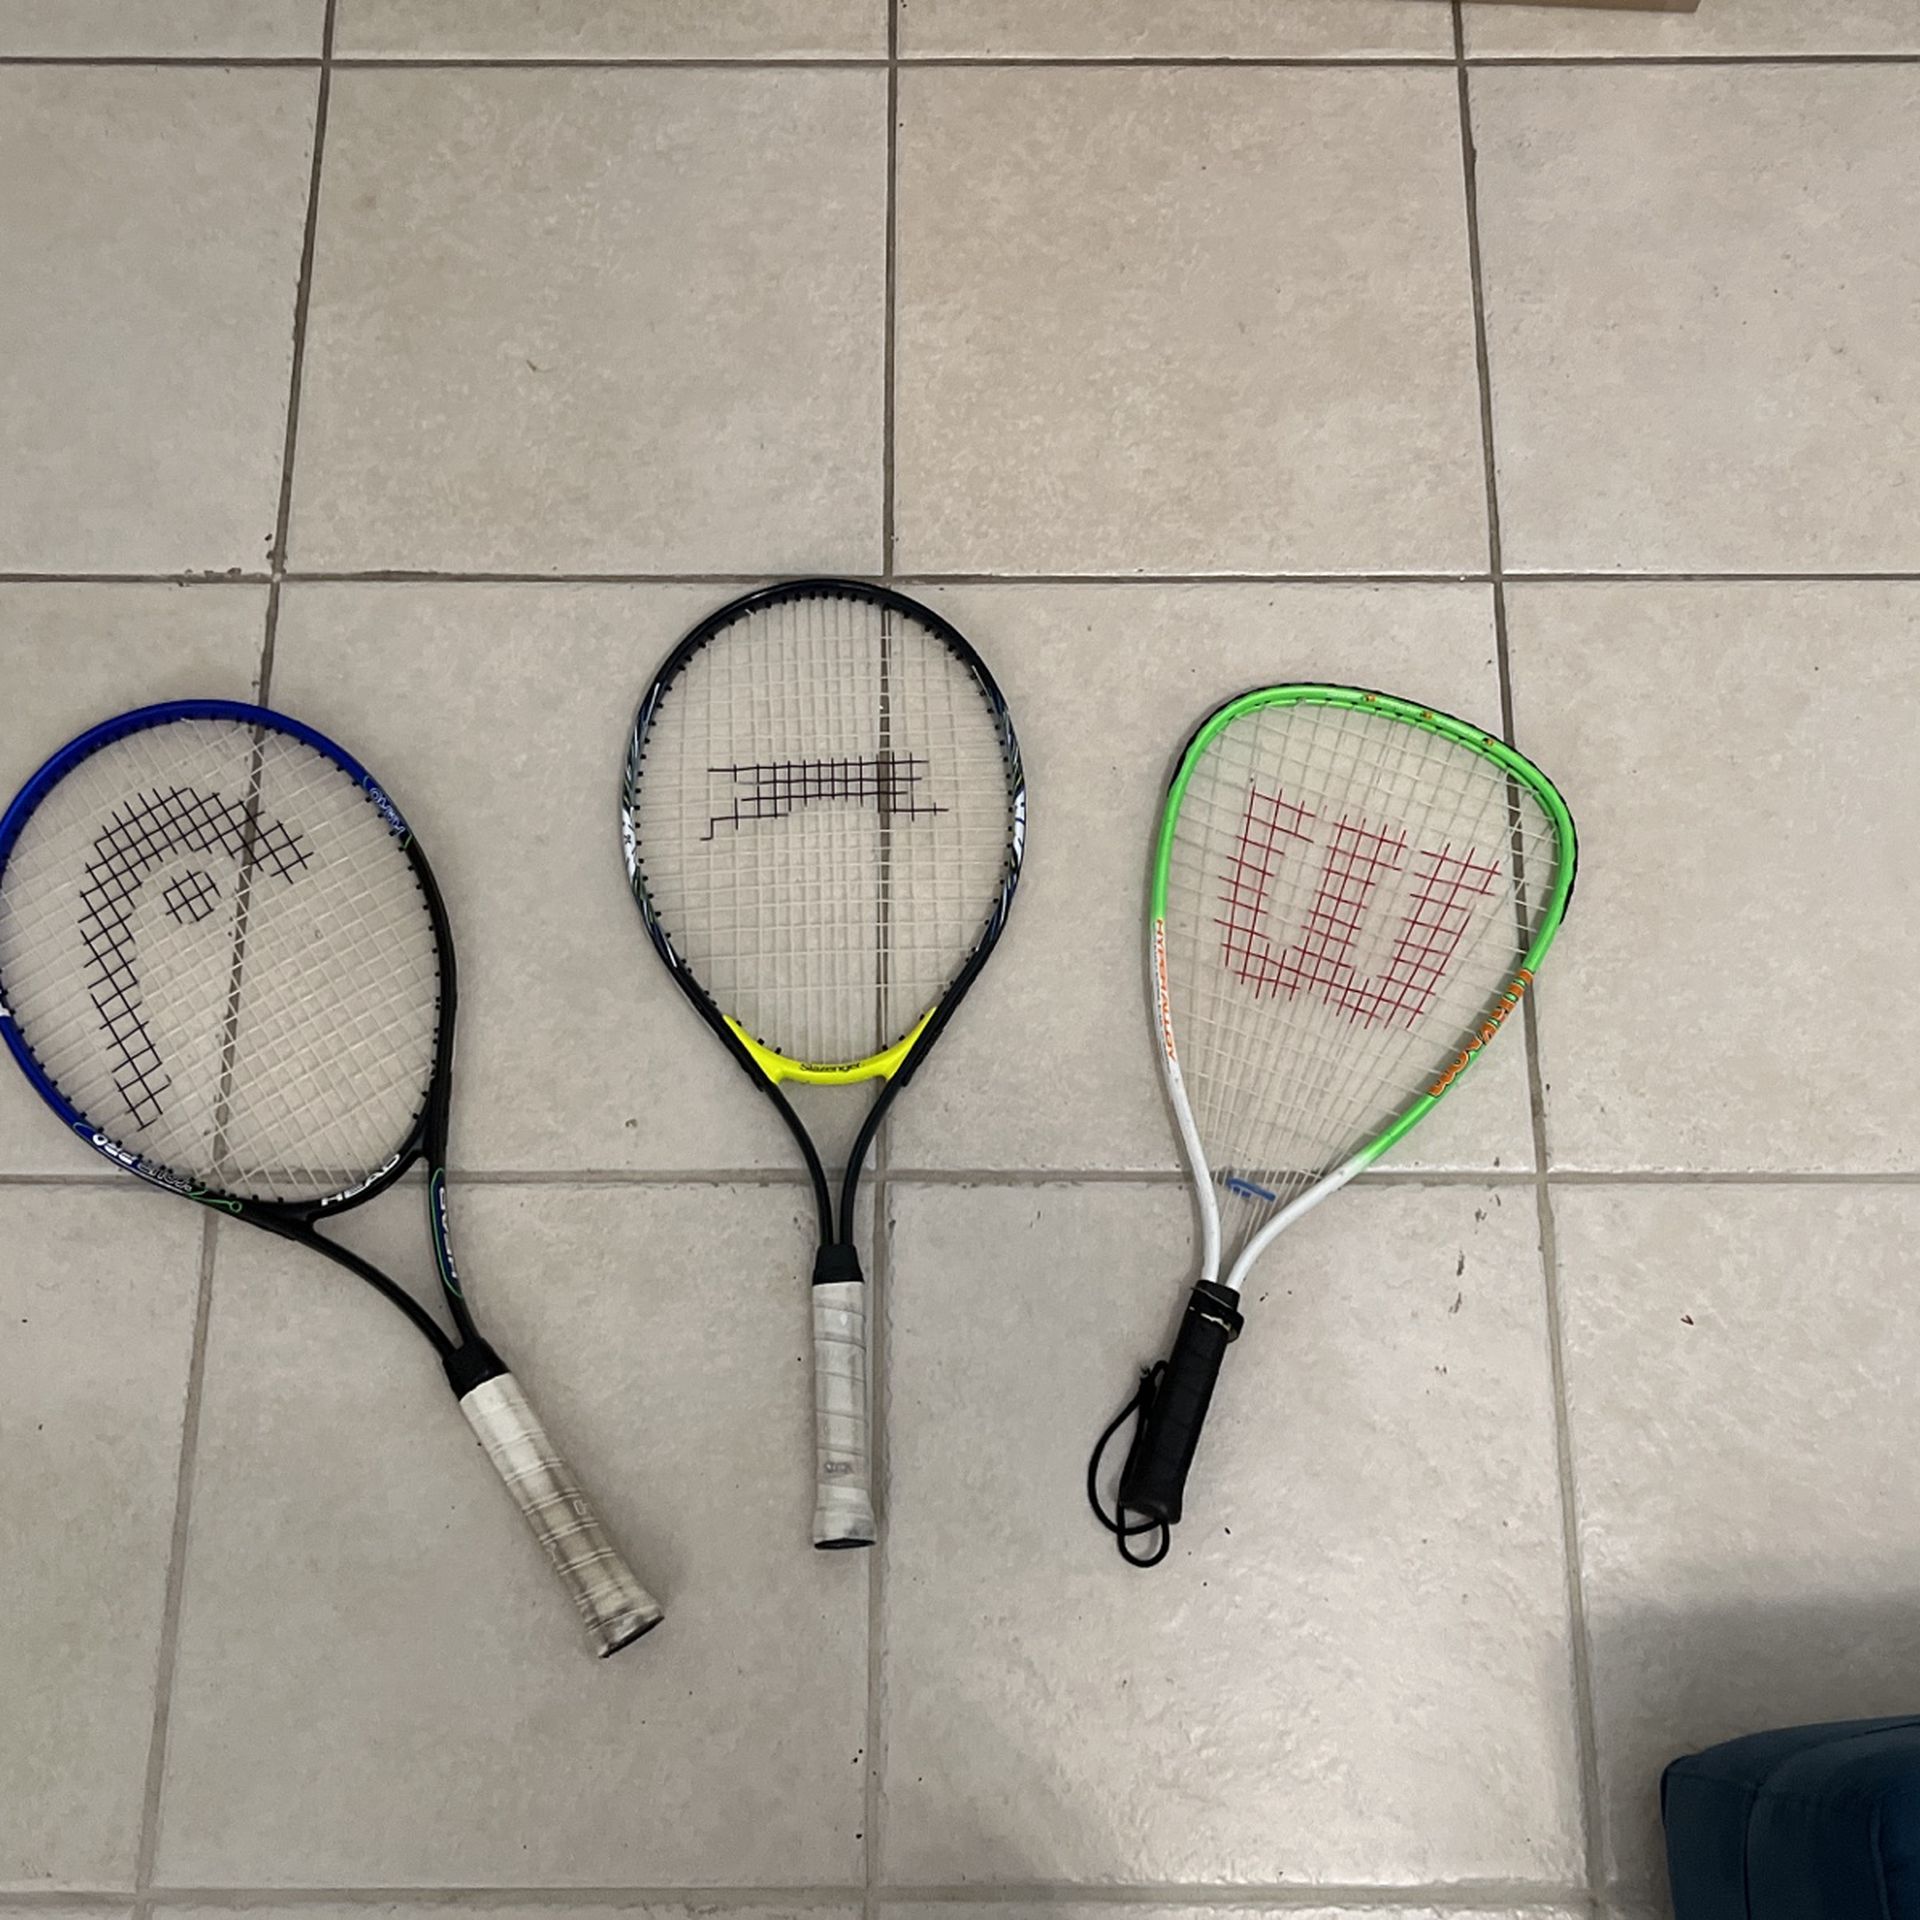 Racquetball And tennis Rackets (racquets)